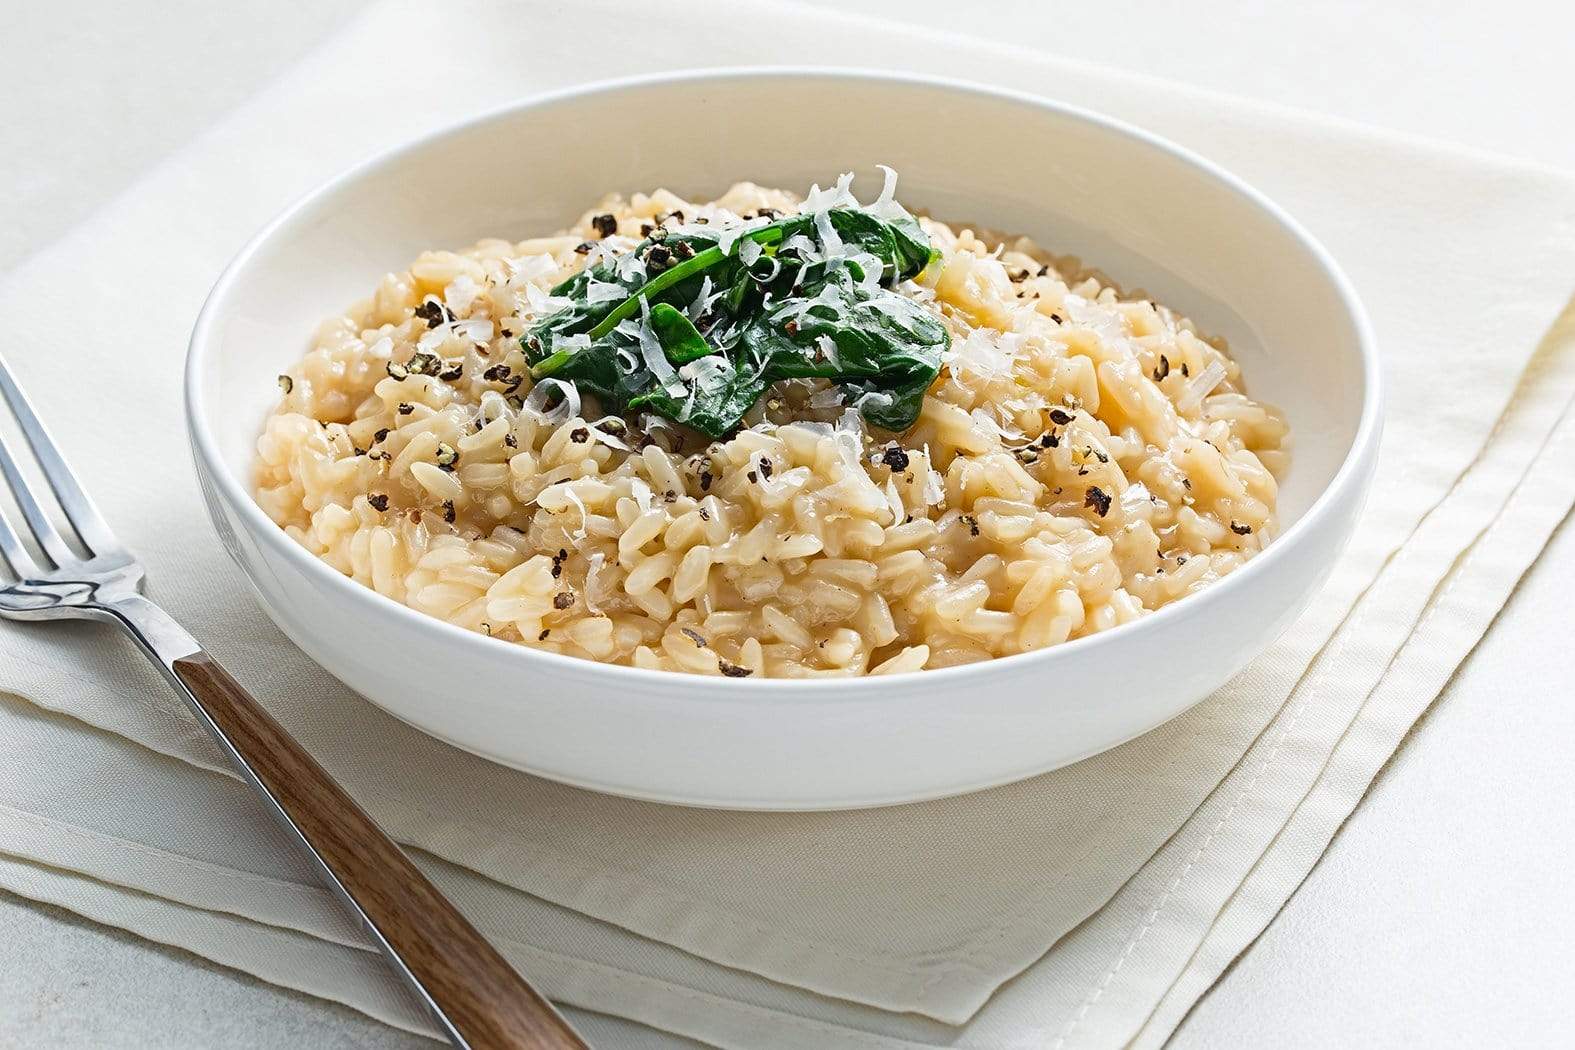 Cuisine Solutions Serve a Few Risotto with White Wine ~ 8-10 Servings (30 oz. Pouch)